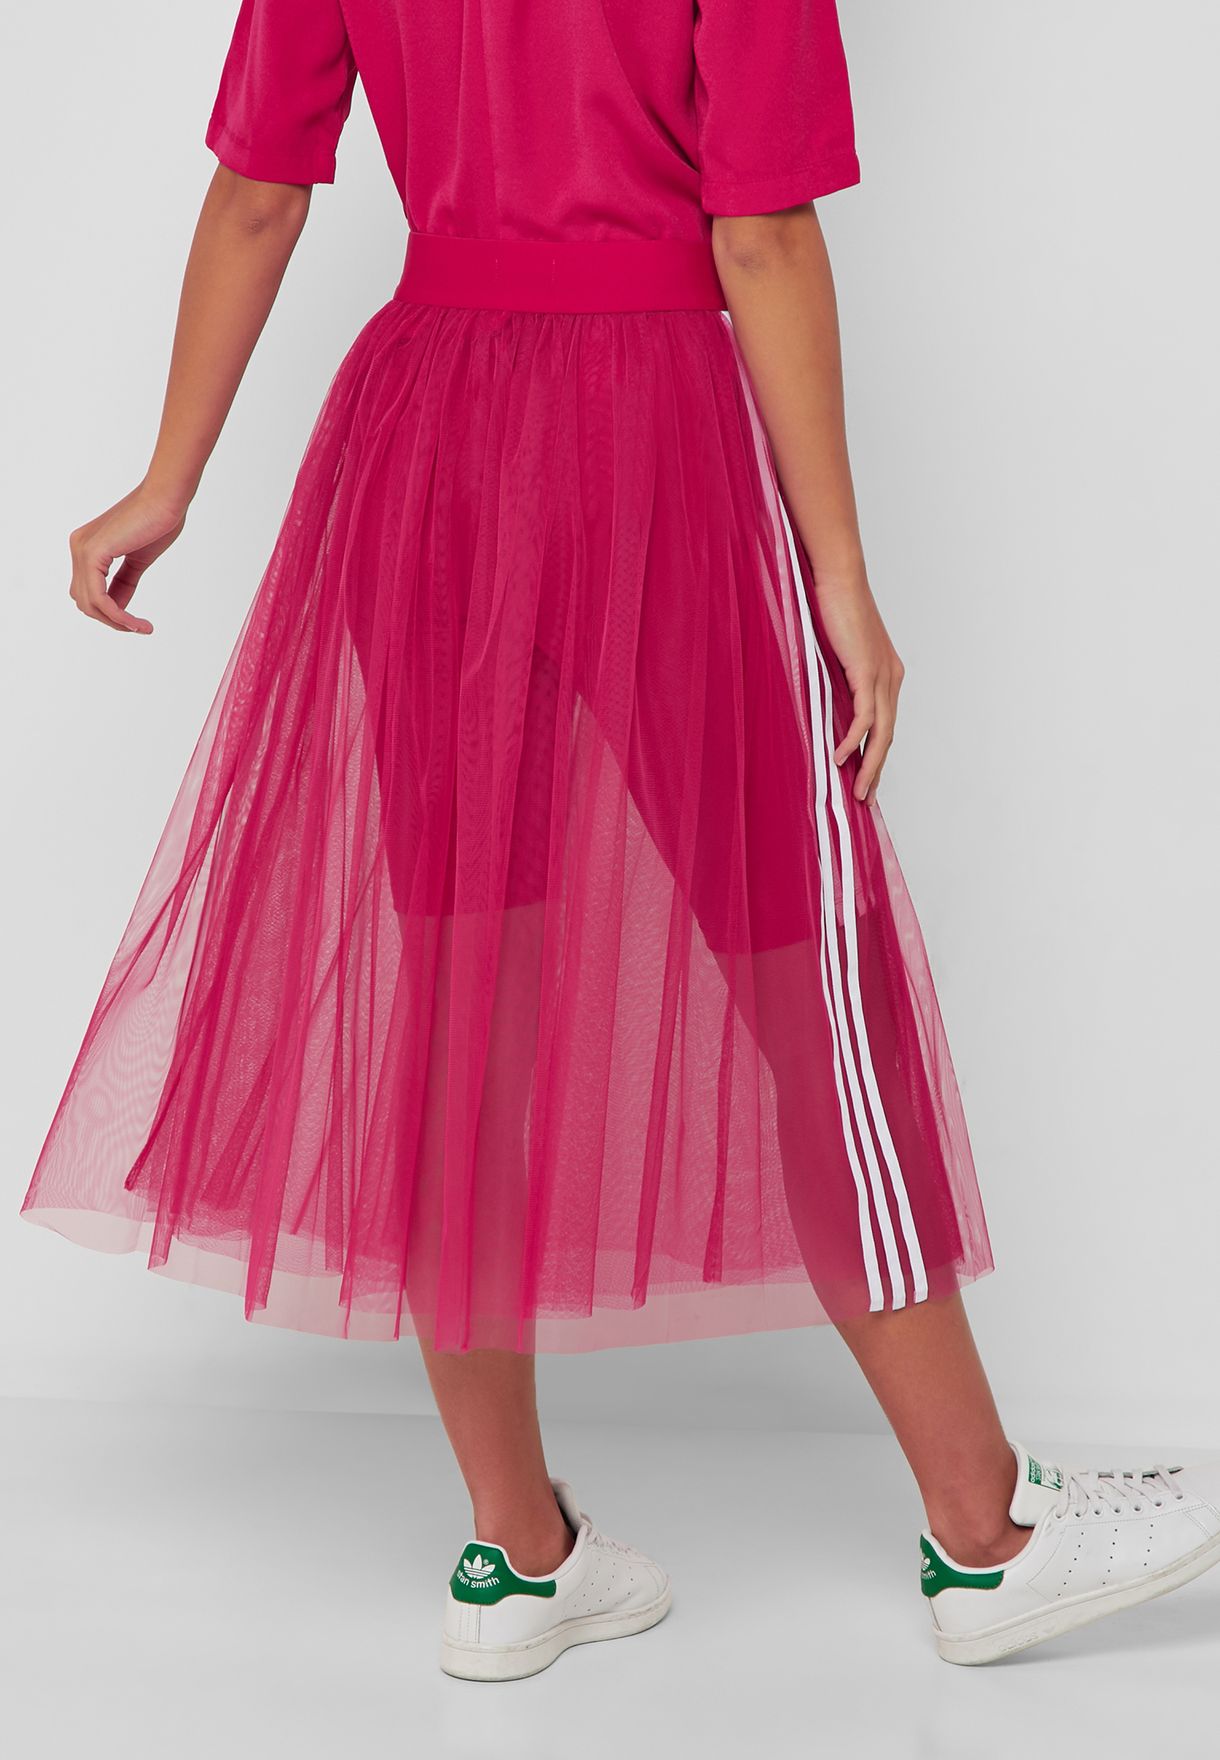 Adidas Tulle Skirt Pink | vlr.eng.br